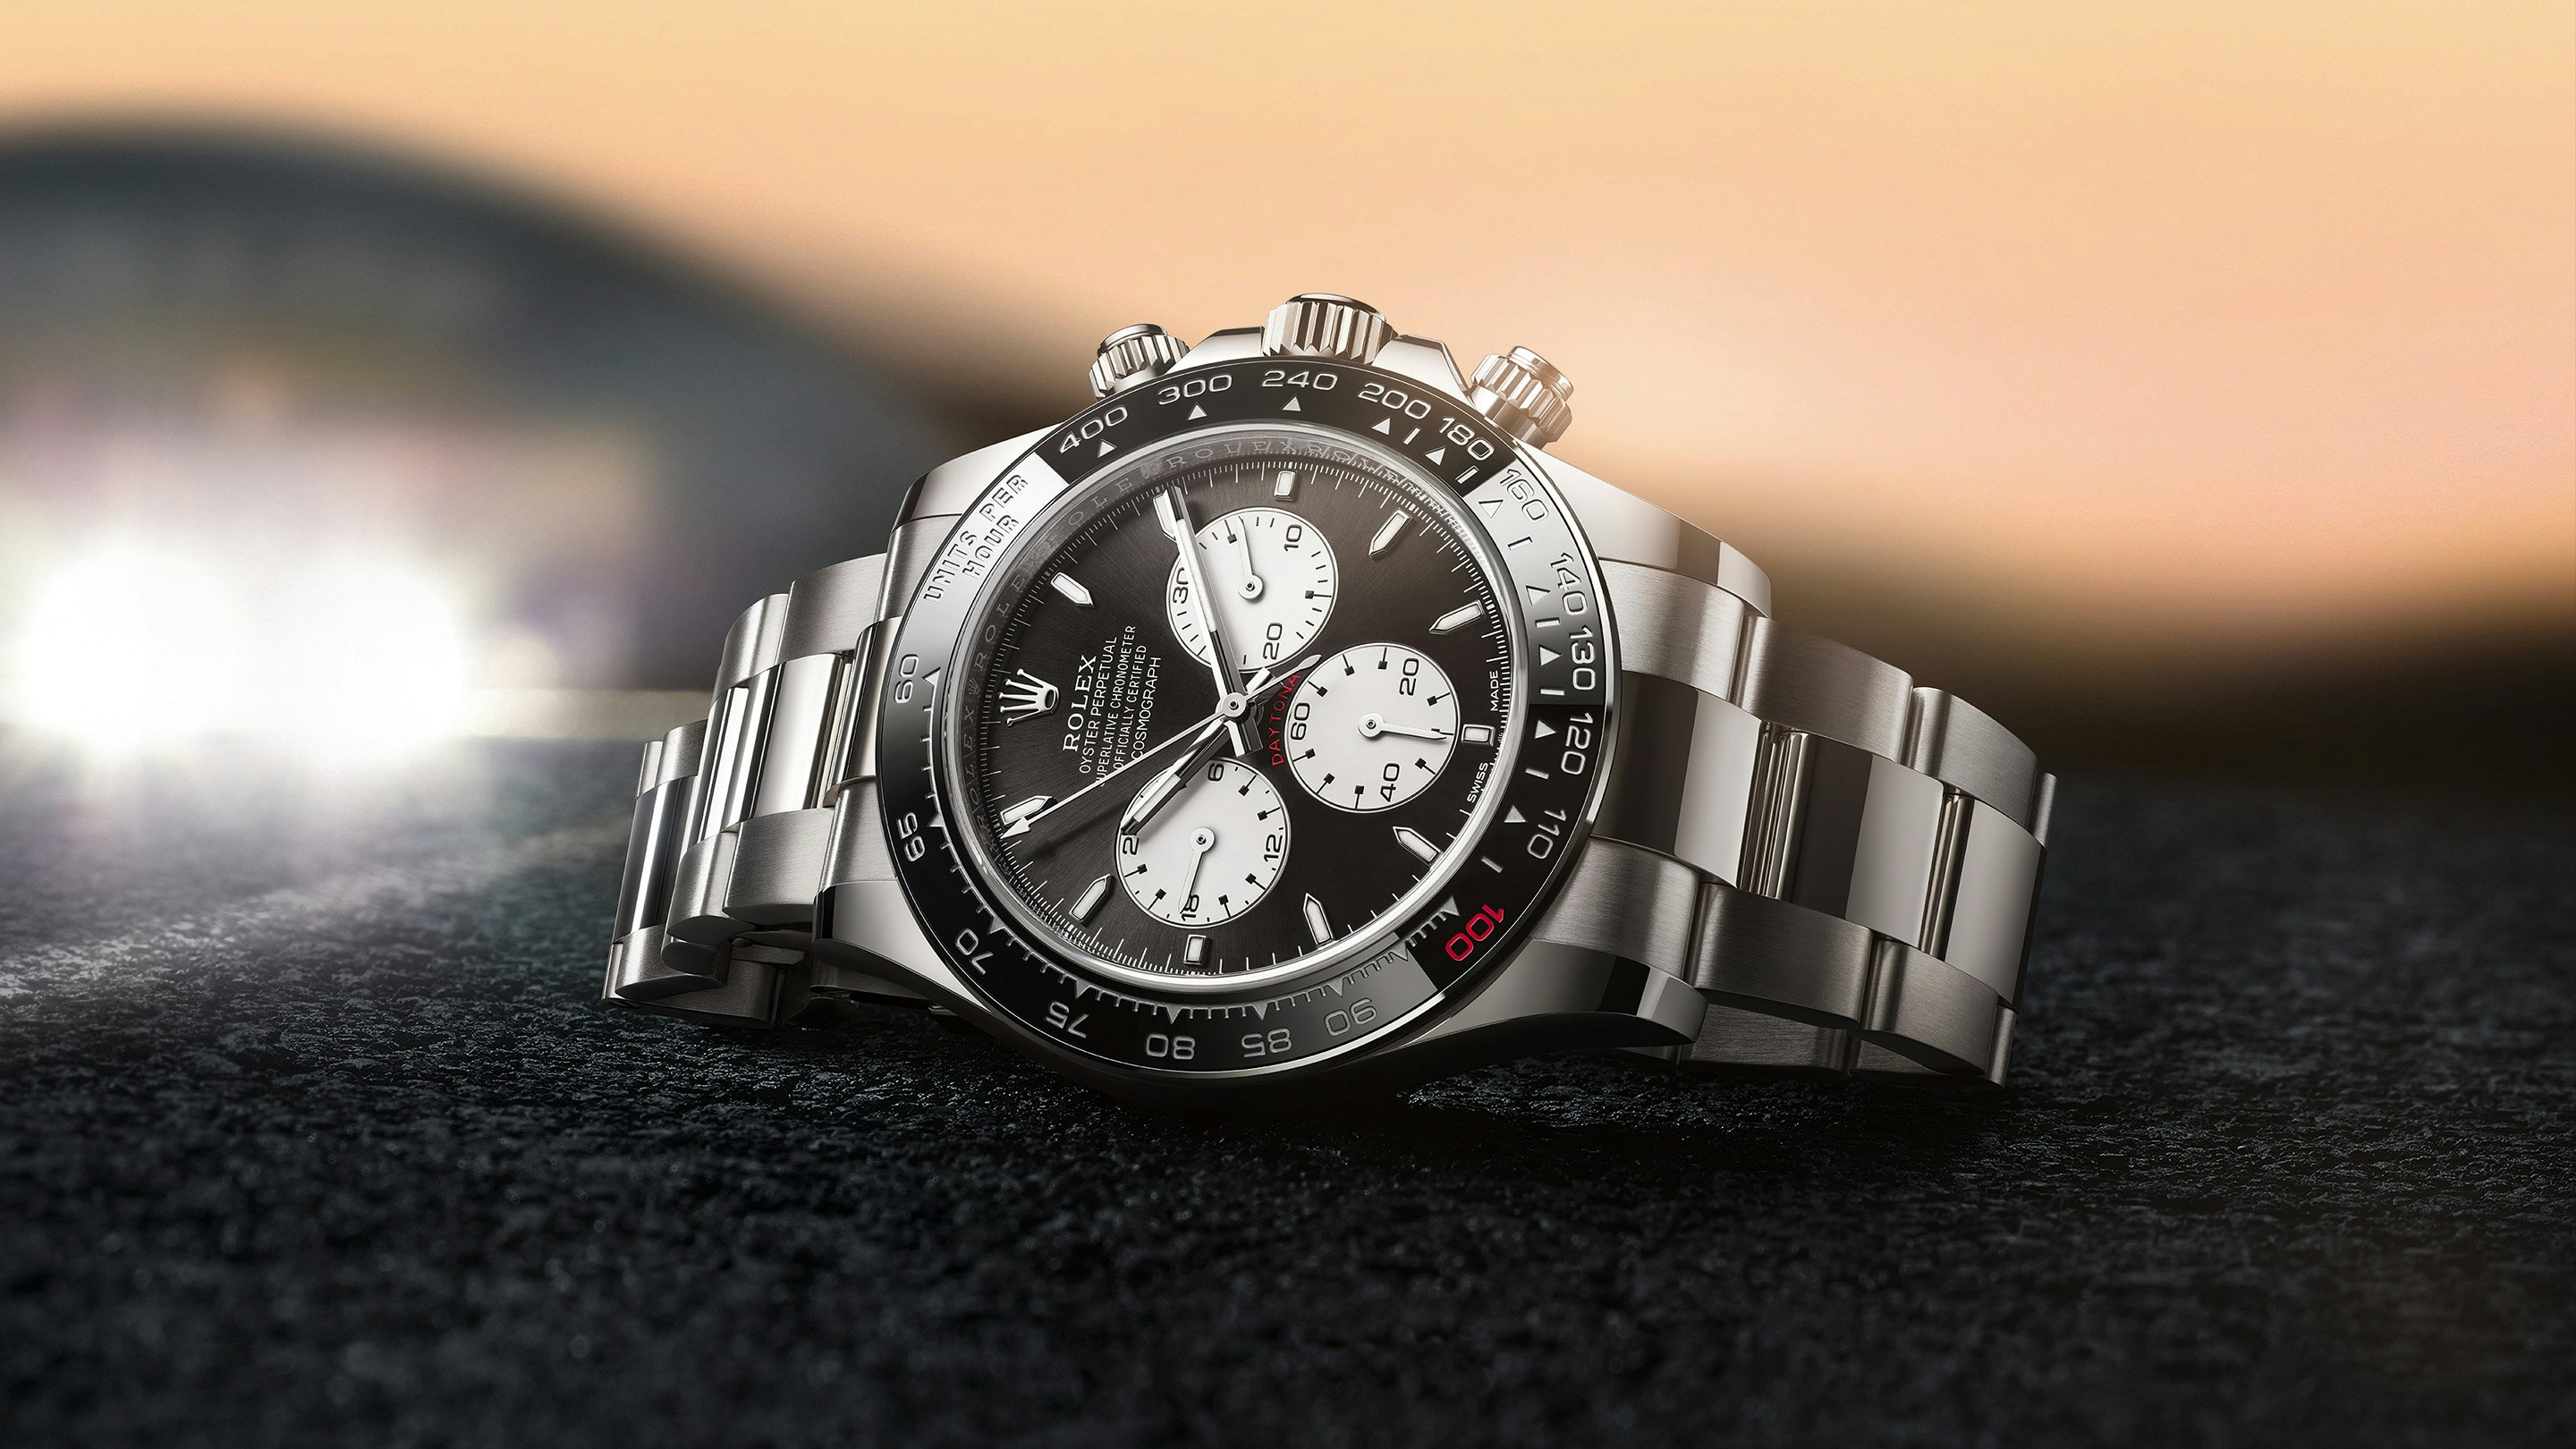 Introducing A Special Rolex Daytona For The 100th Running Of The 24 Hours Of Le Mans (With Live Pics From The Race)